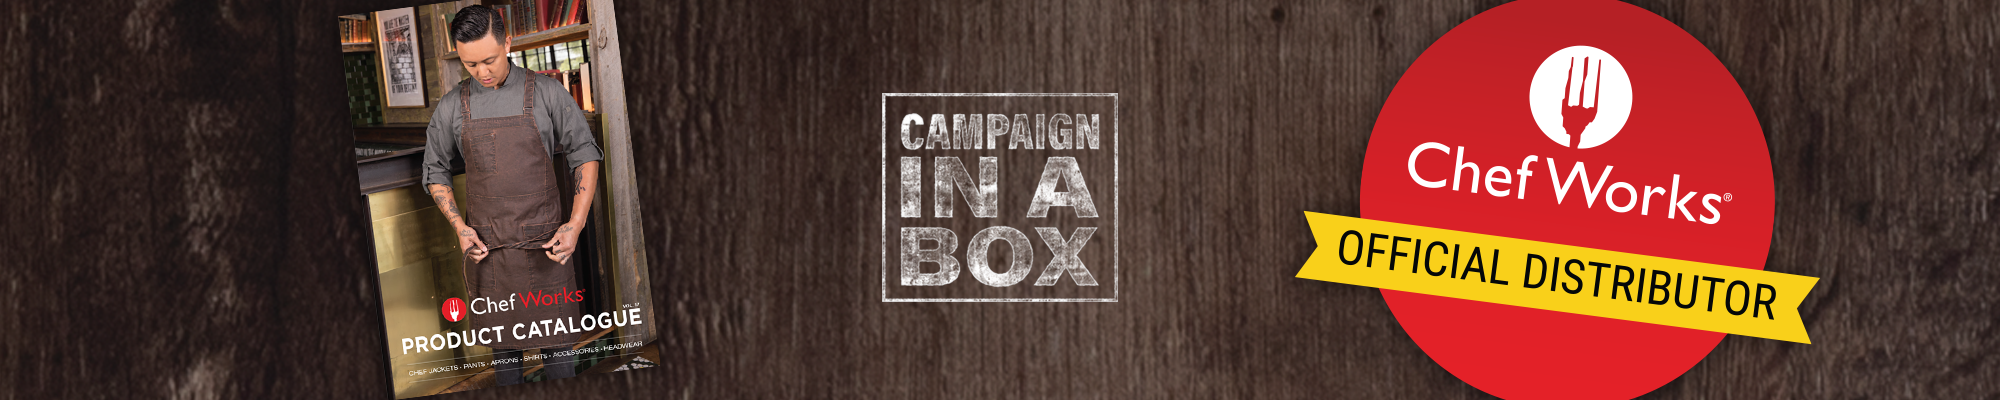 Campaign in a Box - The Chef Works Brand - Chef Works